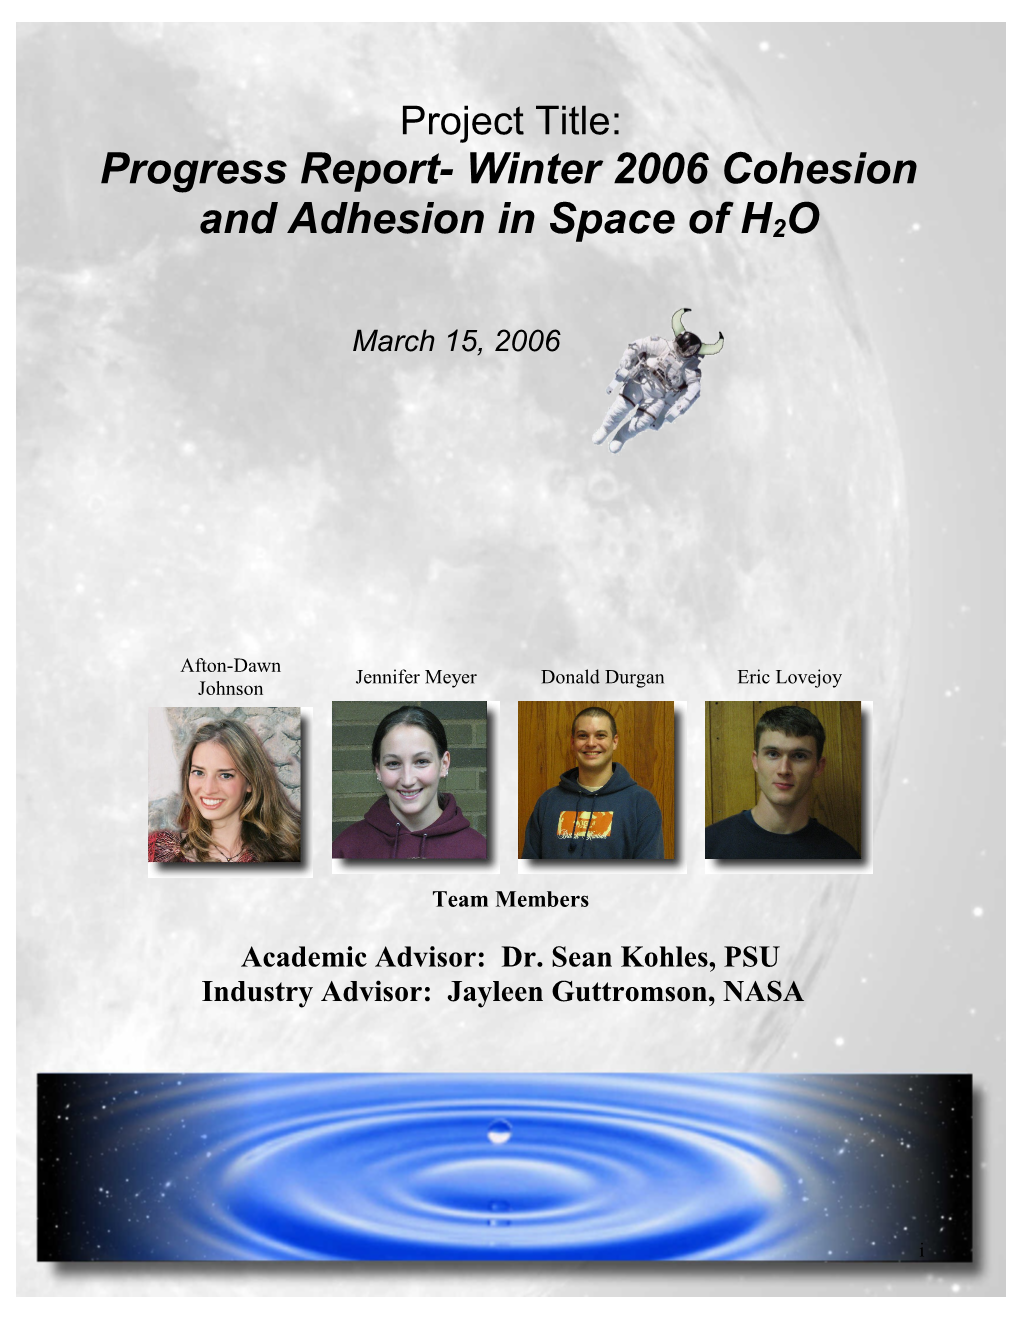 Progress Report- Winter 2006 Cohesion and Adhesion in Space of H2O